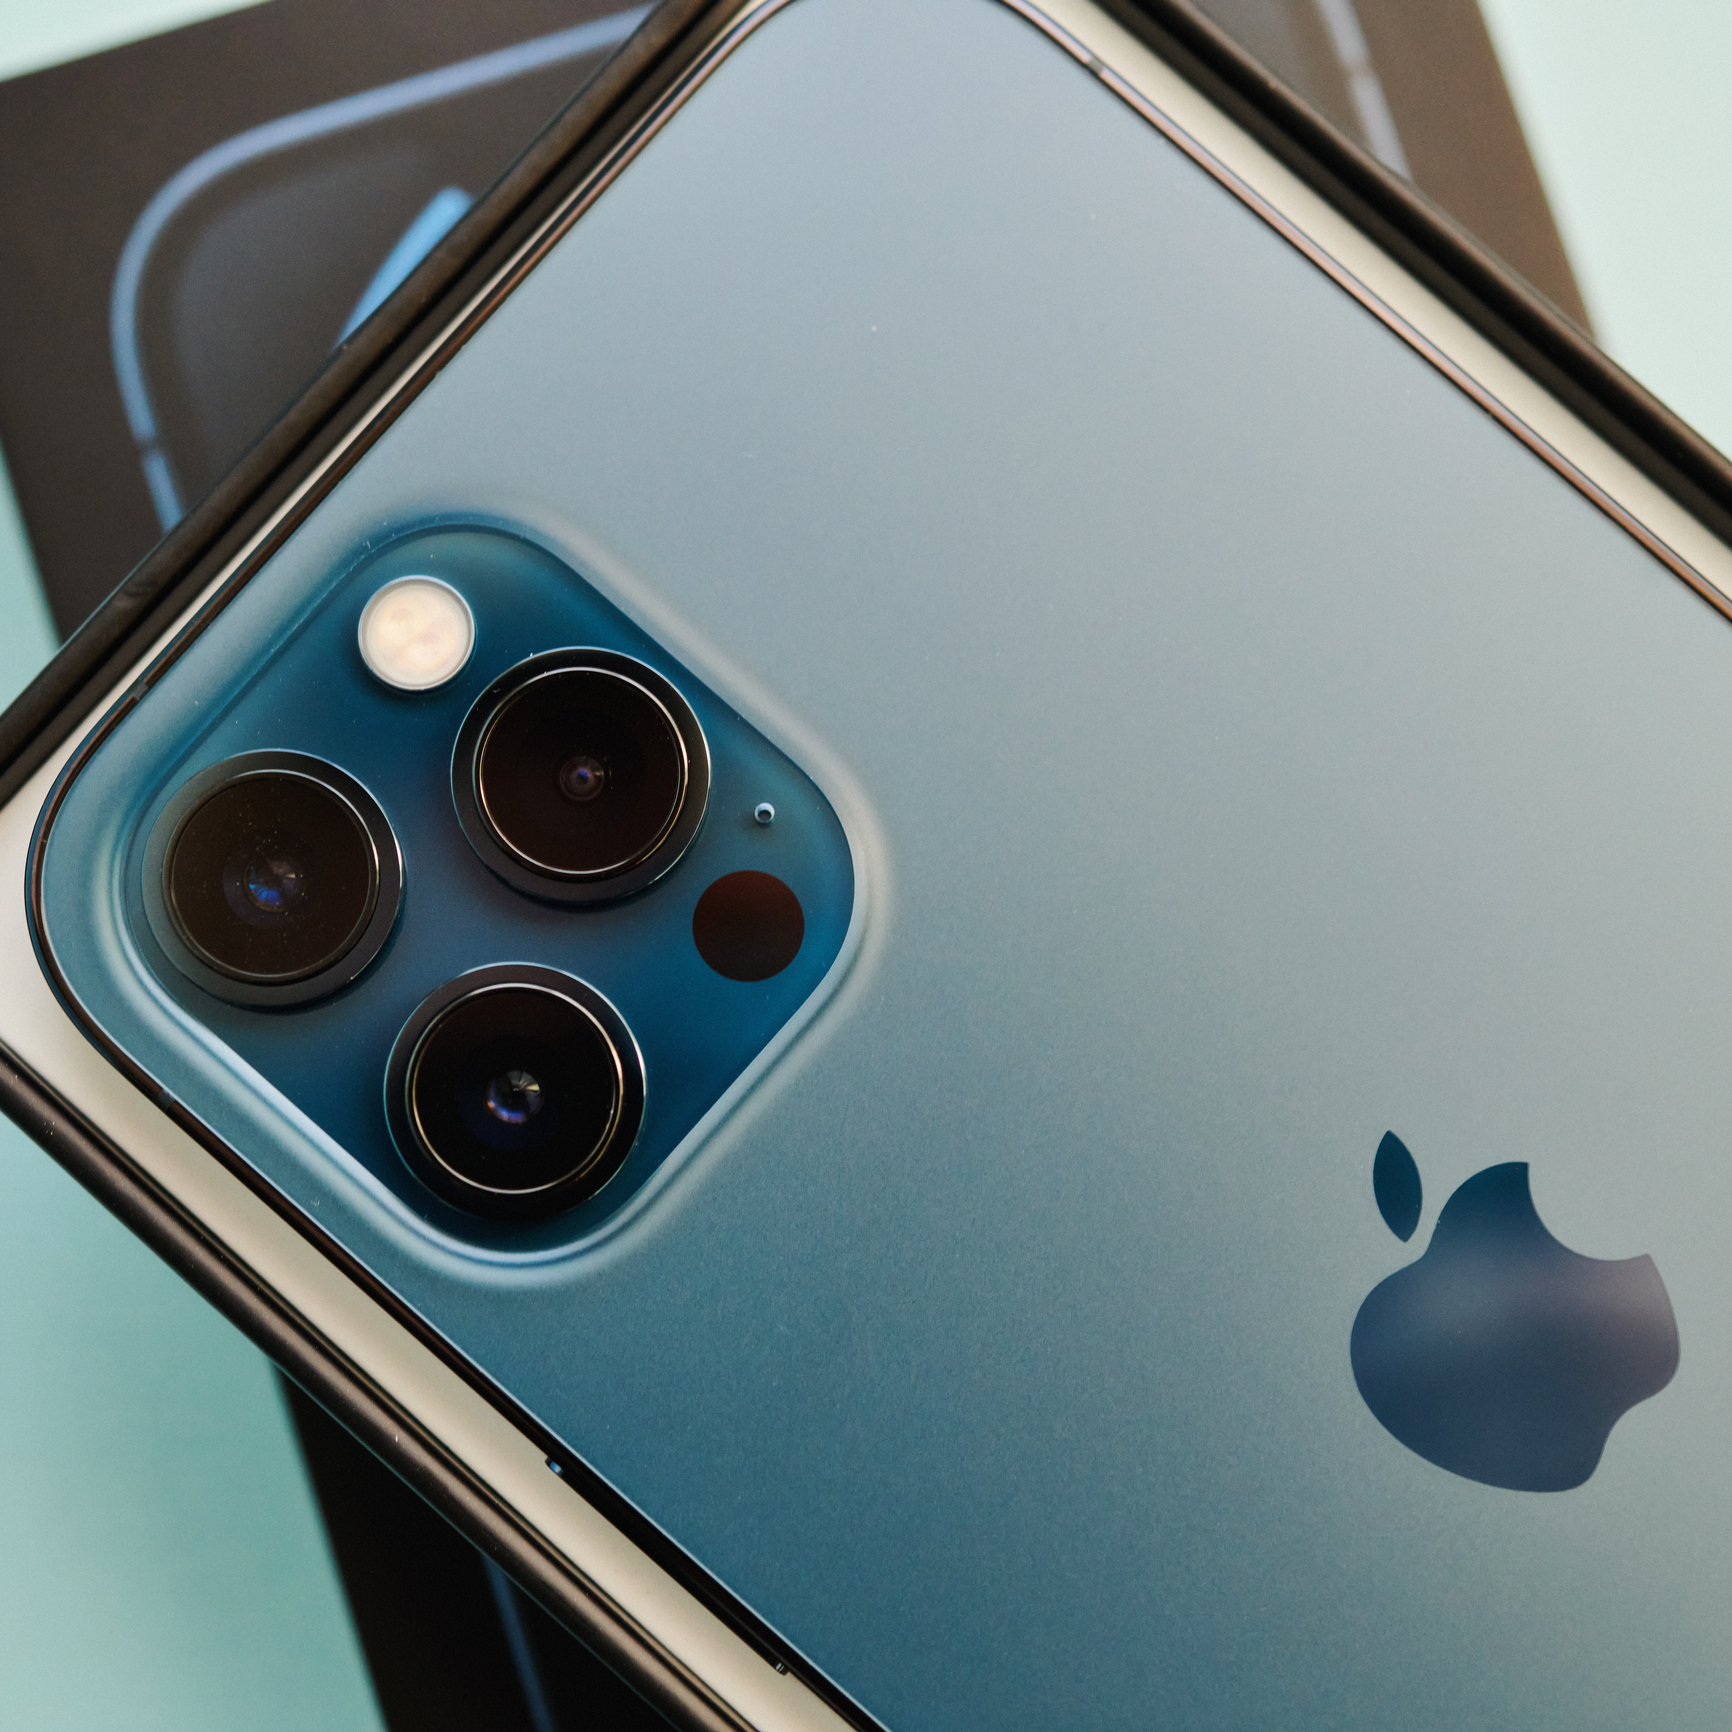 iPhone 12 Camera Features including Optimal Zoom